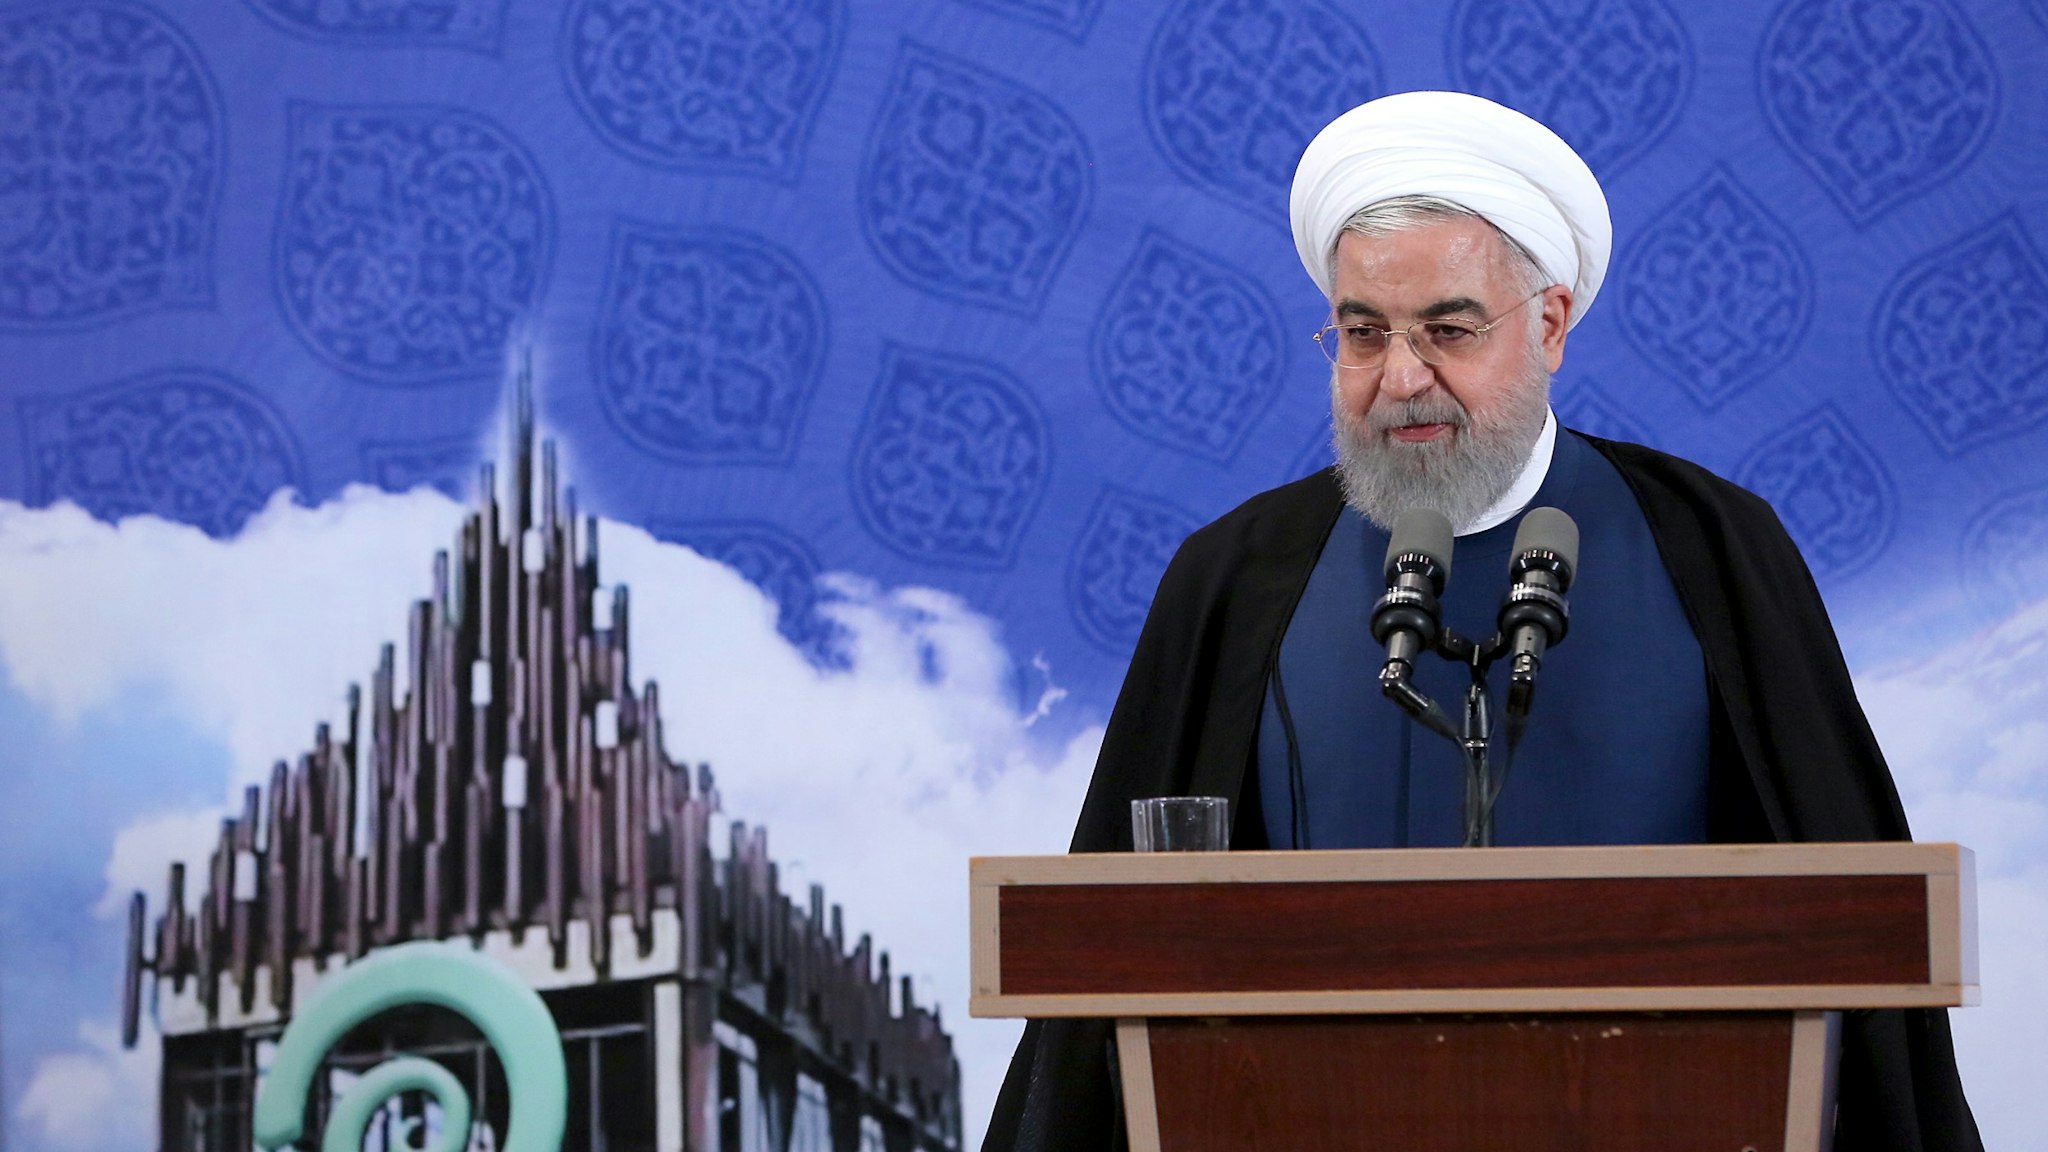 TEHRAN, IRAN - NOVEMBER 5: (----EDITORIAL USE ONLY MANDATORY CREDIT - "IRANIAN PRESIDENCY / HANDOUT" - NO MARKETING NO ADVERTISING CAMPAIGNS - DISTRIBUTED AS A SERVICE TO CLIENTS----) Iranian President, Hassan Rouhani speaks during the opening ceremony of Free Innovation Factory in Tehran, Iran on November 5, 2019. (Photo by Iranian Presidency / Handout/Anadolu Agency via Getty Images)